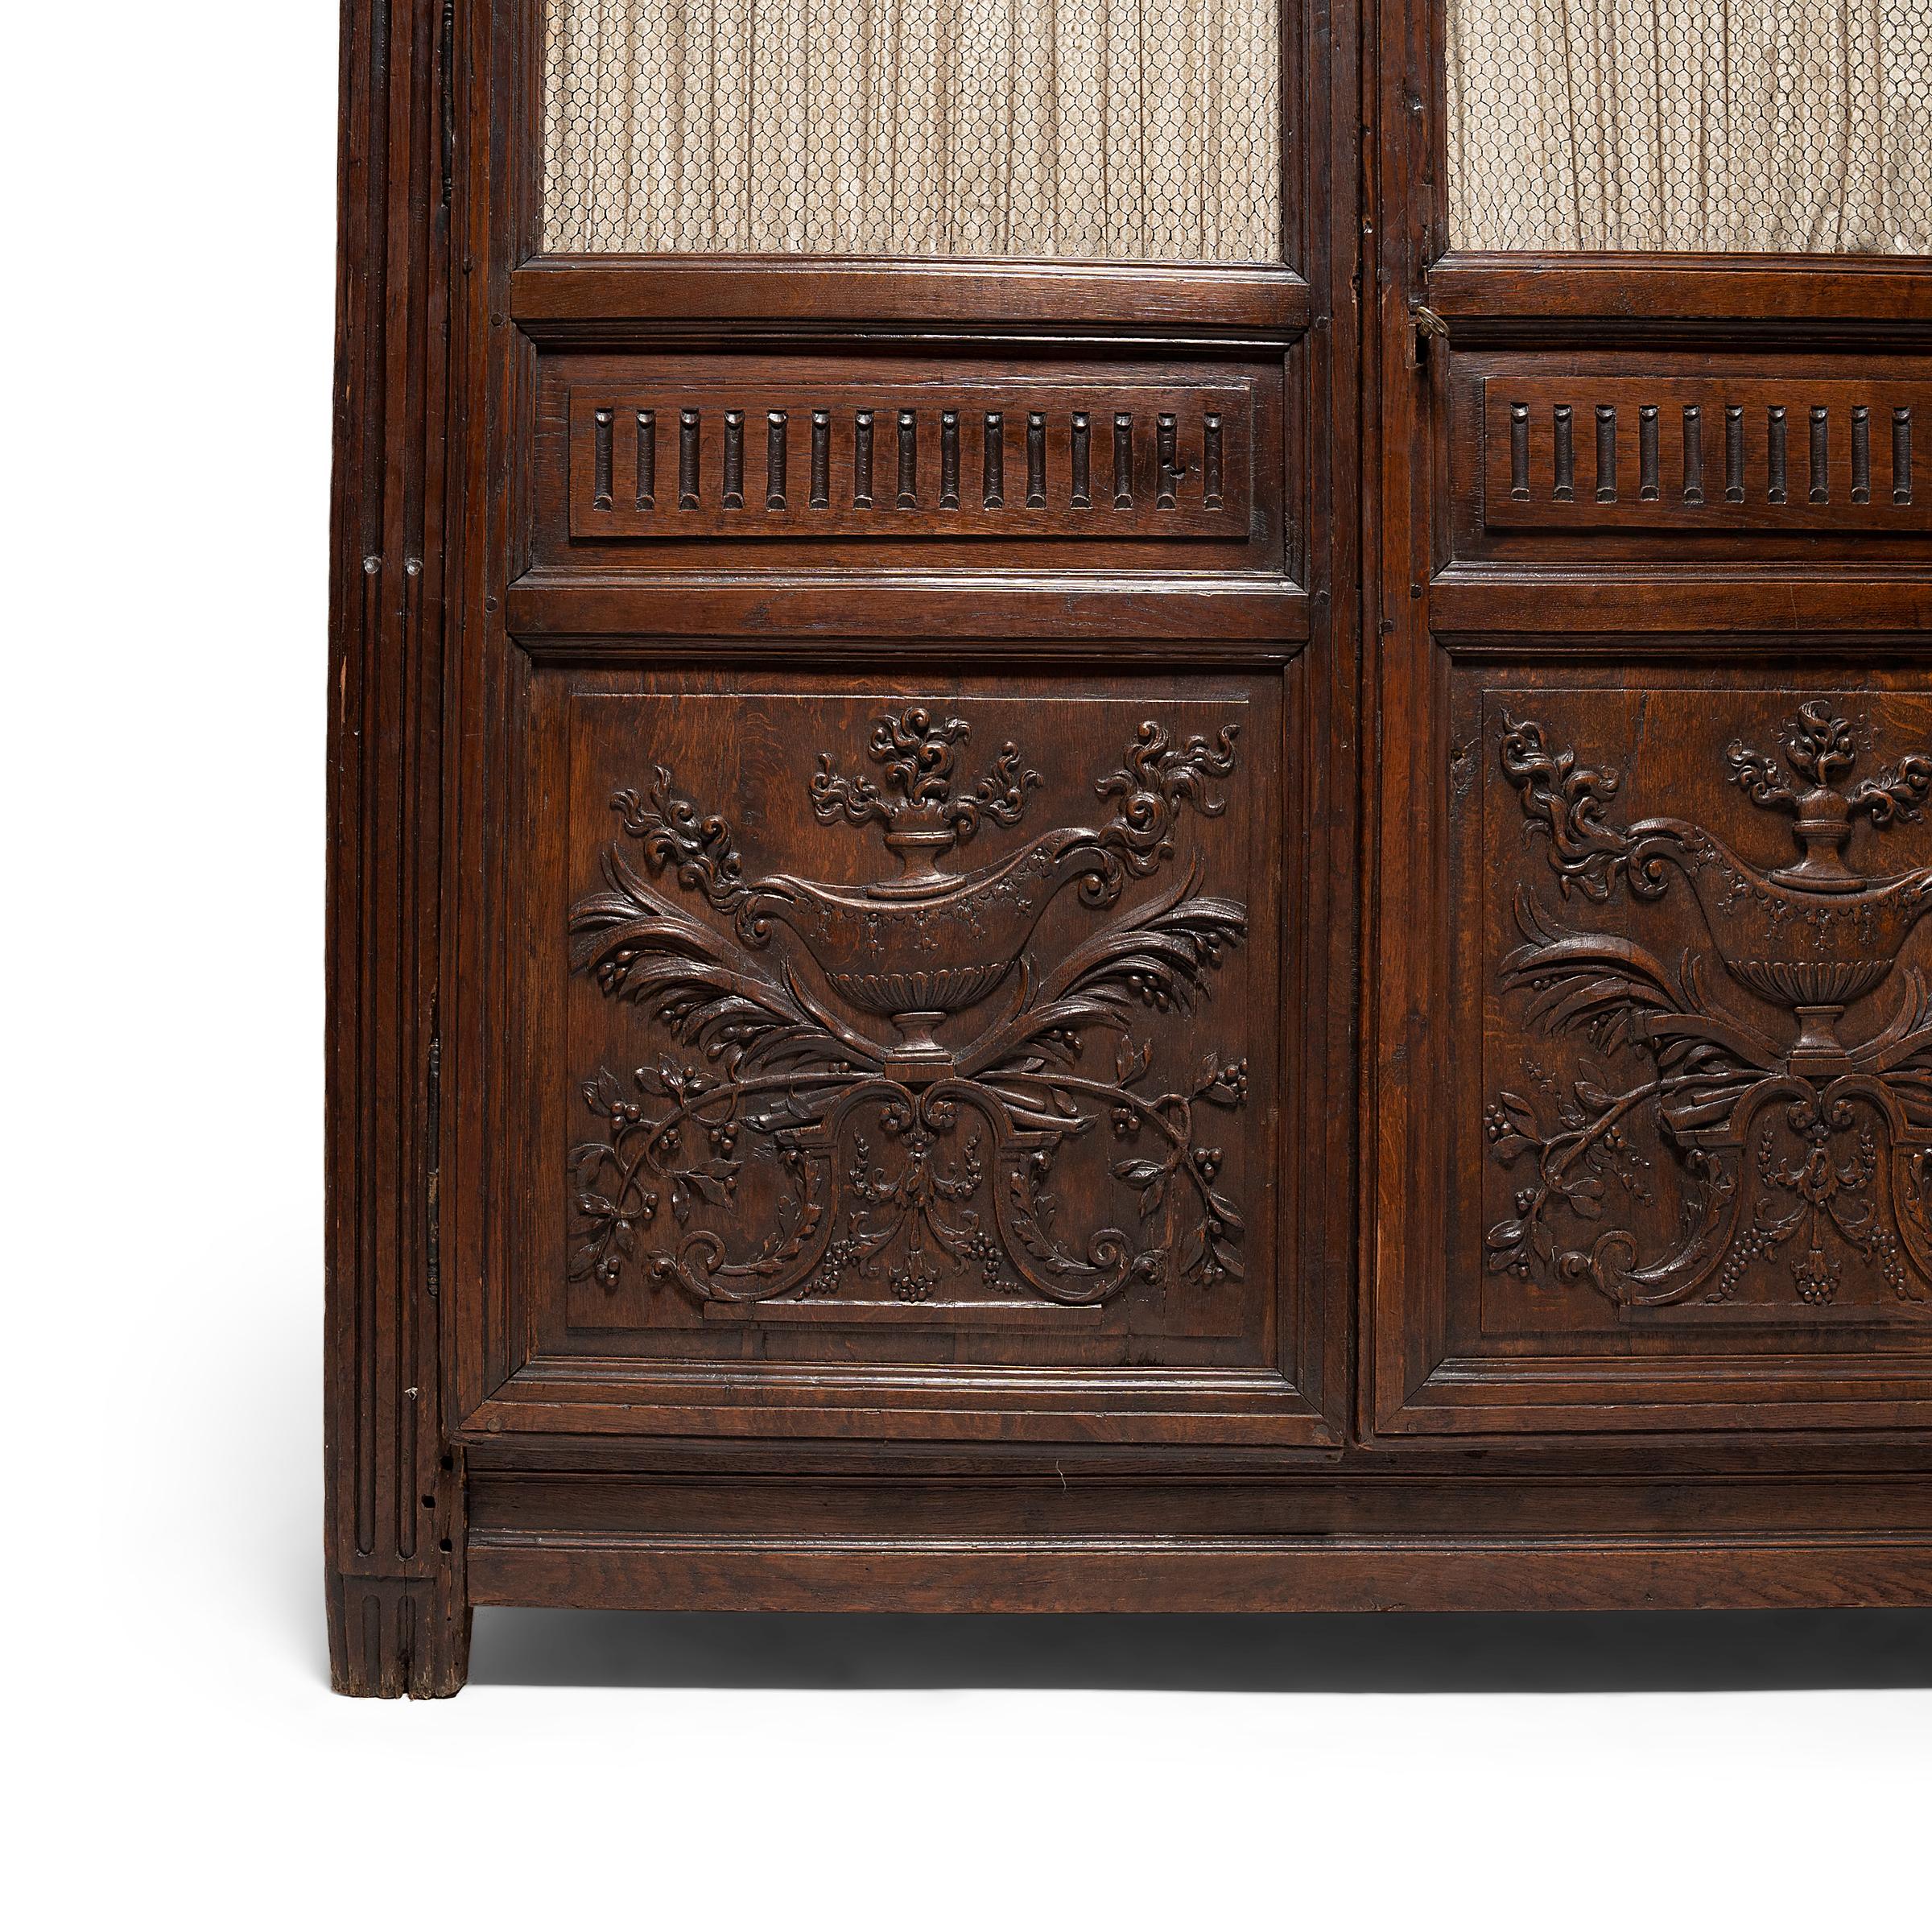 Grand Renaissance Revival Armoire with Wire Screens, circa 1800 For Sale 2